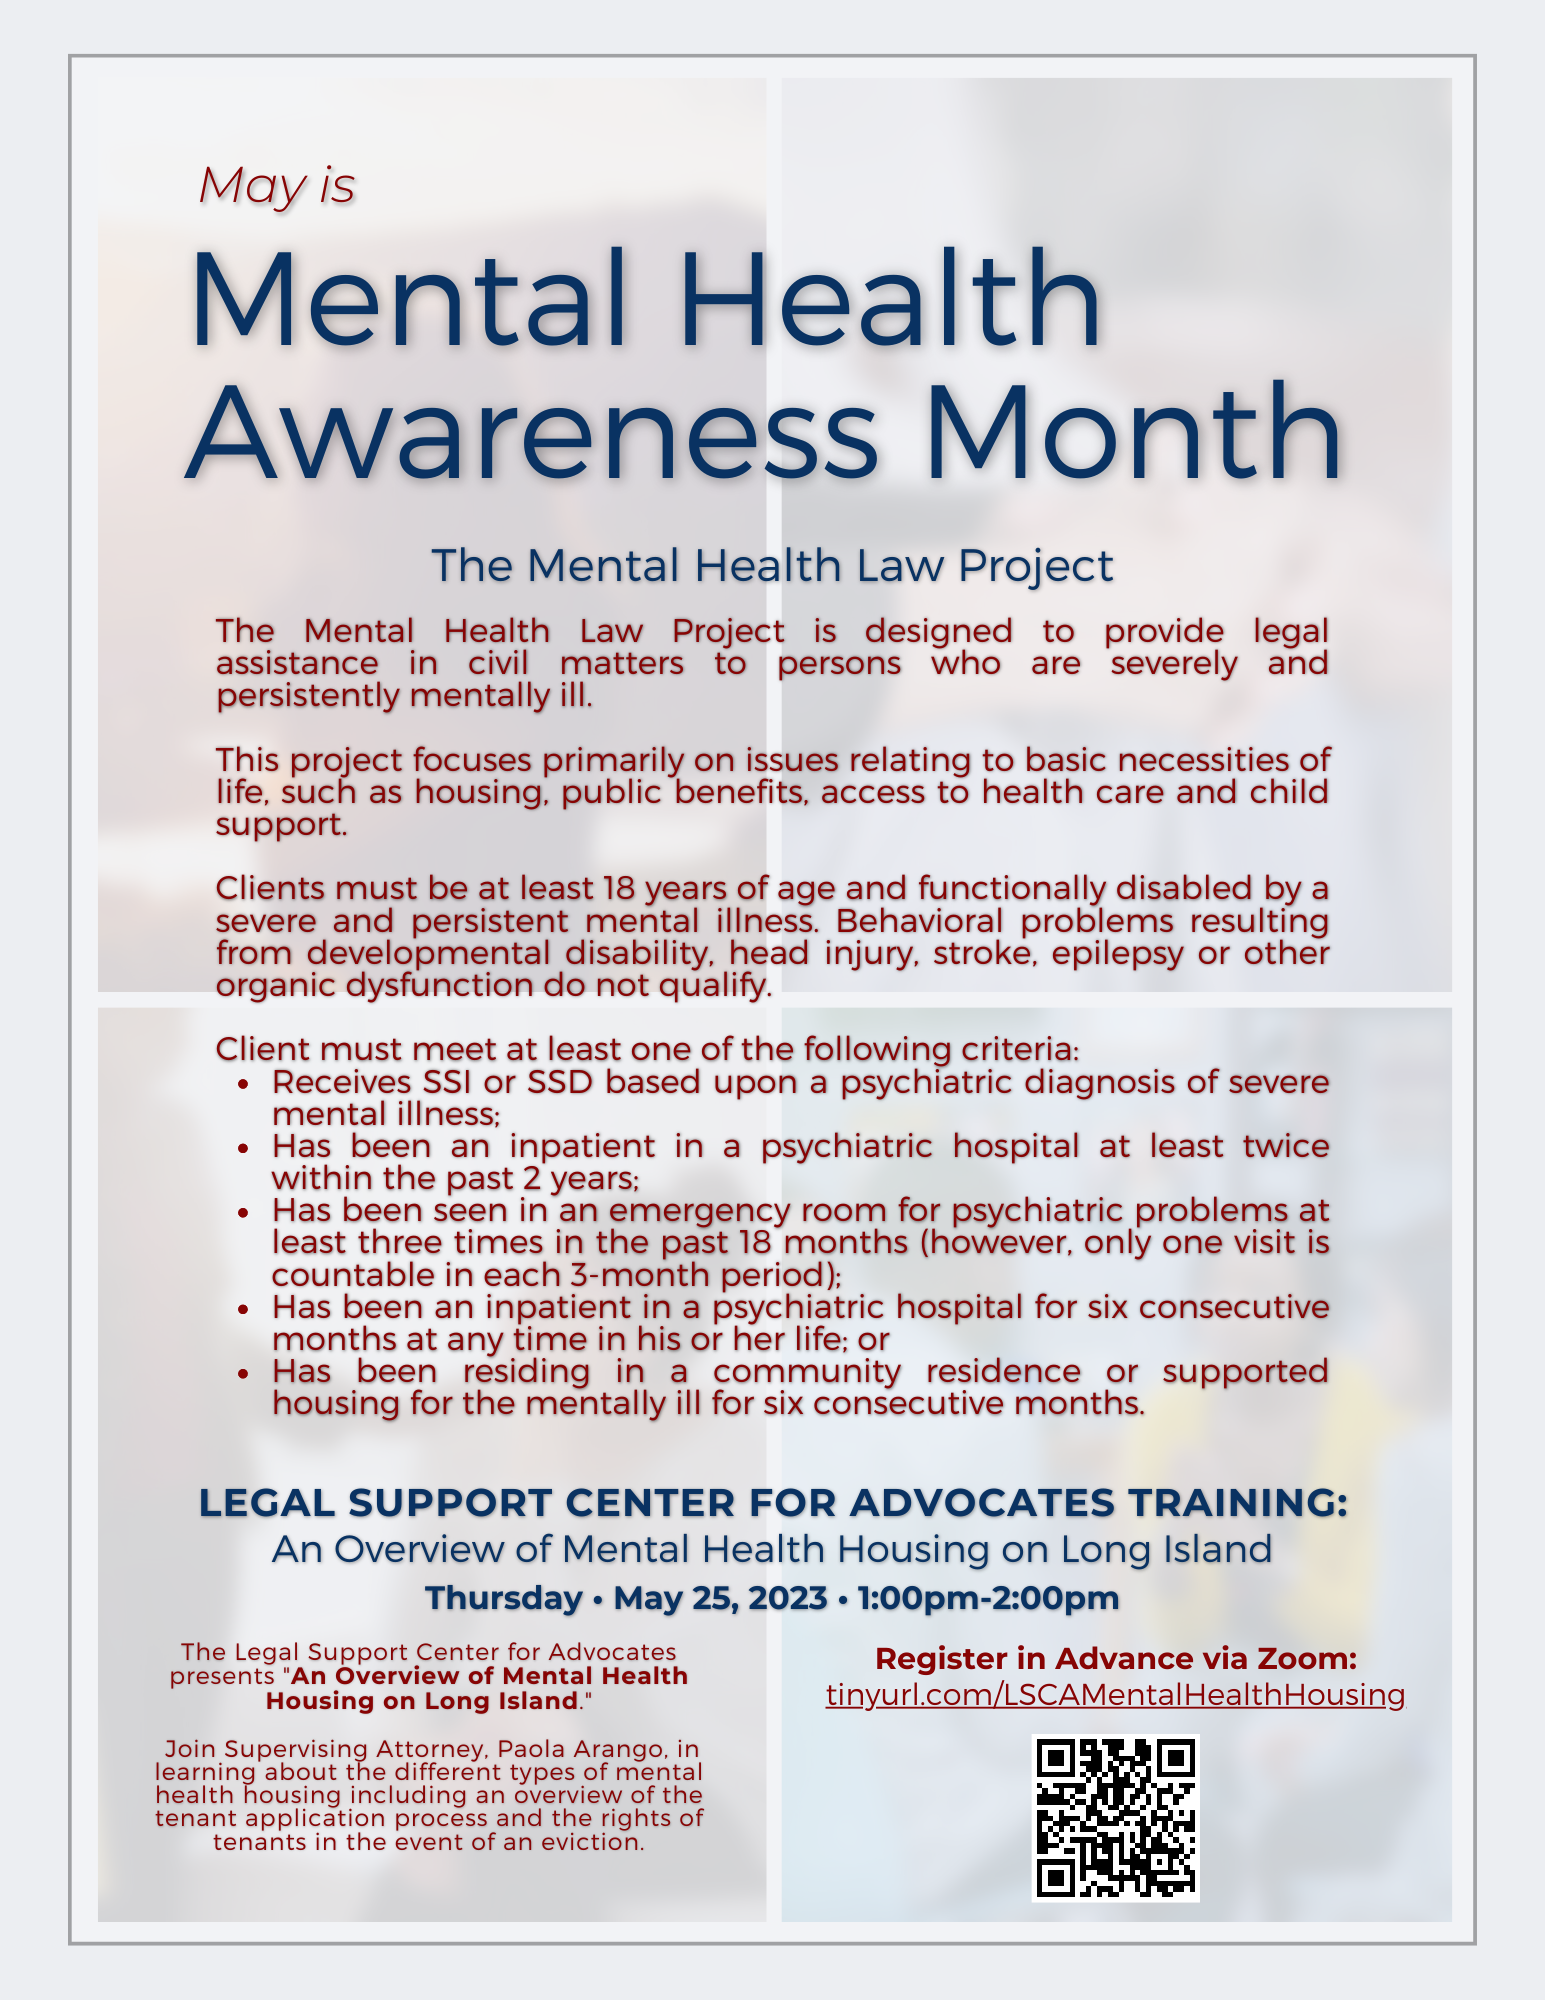 May is Mental Health Awareness Month The Mental Health Law Project The Mental Health Law Project is designed to provide legal assistance in civil matters to persons who are severely and persistently mentally ill. This project focuses primarily on issues relating to basic necessities of life, such as housing, public benefits, access to health care and child support. Clients must be at least 18 years of age and functionally disabled by a severe and persistent mental illness. Behavioral problems resulting from ​developmental disability, head injury, stroke, epilepsy or other organic dysfunction do not qualify. Client must meet at least one of the following criteria: Receives SSI or SSD based upon a psychiatric diagnosis of severe mental illness; Has been an inpatient in a psychiatric hospital at least twice within the past 2 years; Has been seen in an emergency room for psychiatric problems at least three times in the past 18 months (however, only one visit is countable in each 3-month period); Has been an inpatient in a psychiatric hospital for six consecutive months at any time in his or her life; or Has been residing in a community residence or supported housing for the mentally ill for six consecutive months. Legal Support Center for Advocates Training: An Overview of Mental Health Housing on Long Island Thursday • May 25, 2023 • 1:00pm-2:00pm The Legal Support Center for Advocates presents "An Overview of Mental Health Housing on Long Island." Join Supervising Attorney, Paola Arango, in learning about the different types of mental health housing including an overview of the tenant application process and the rights of tenants in the event of an eviction. Register in Advance via Zoom: tinyurl.com/LSCAMentalHealthHousing 